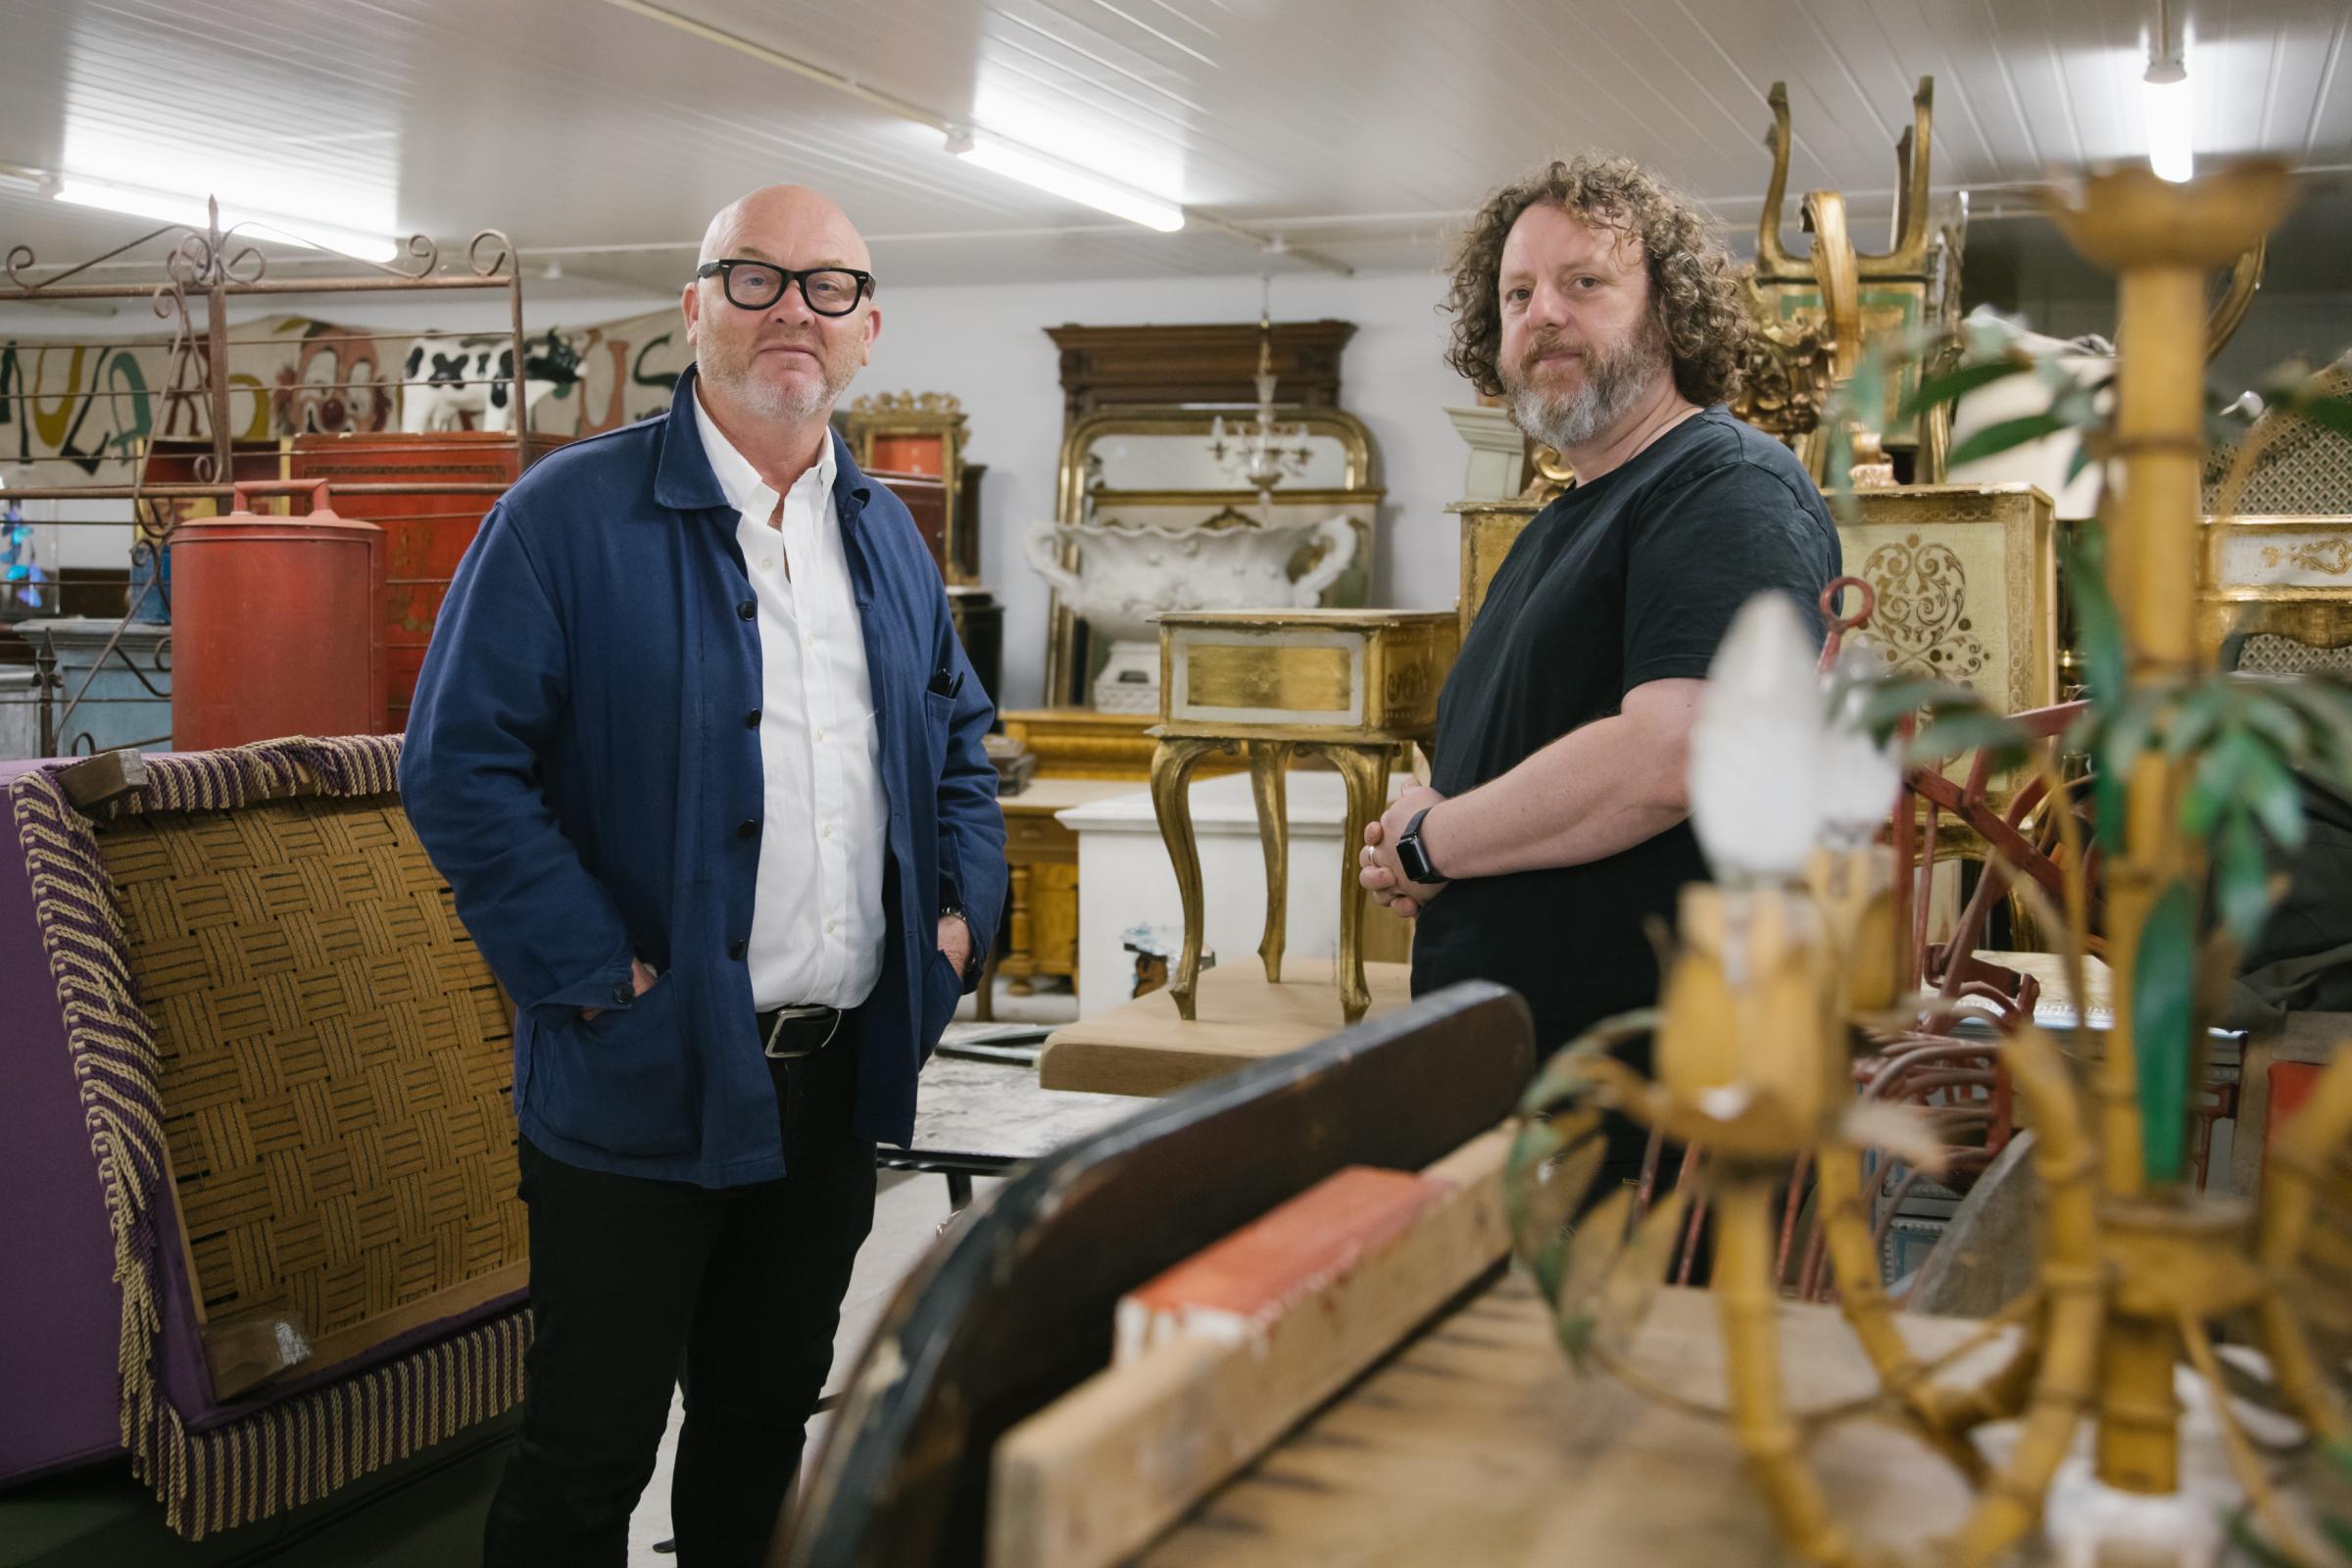 Salvage Hunters is searching for more Yorkshire people and homes to feature in the next series.